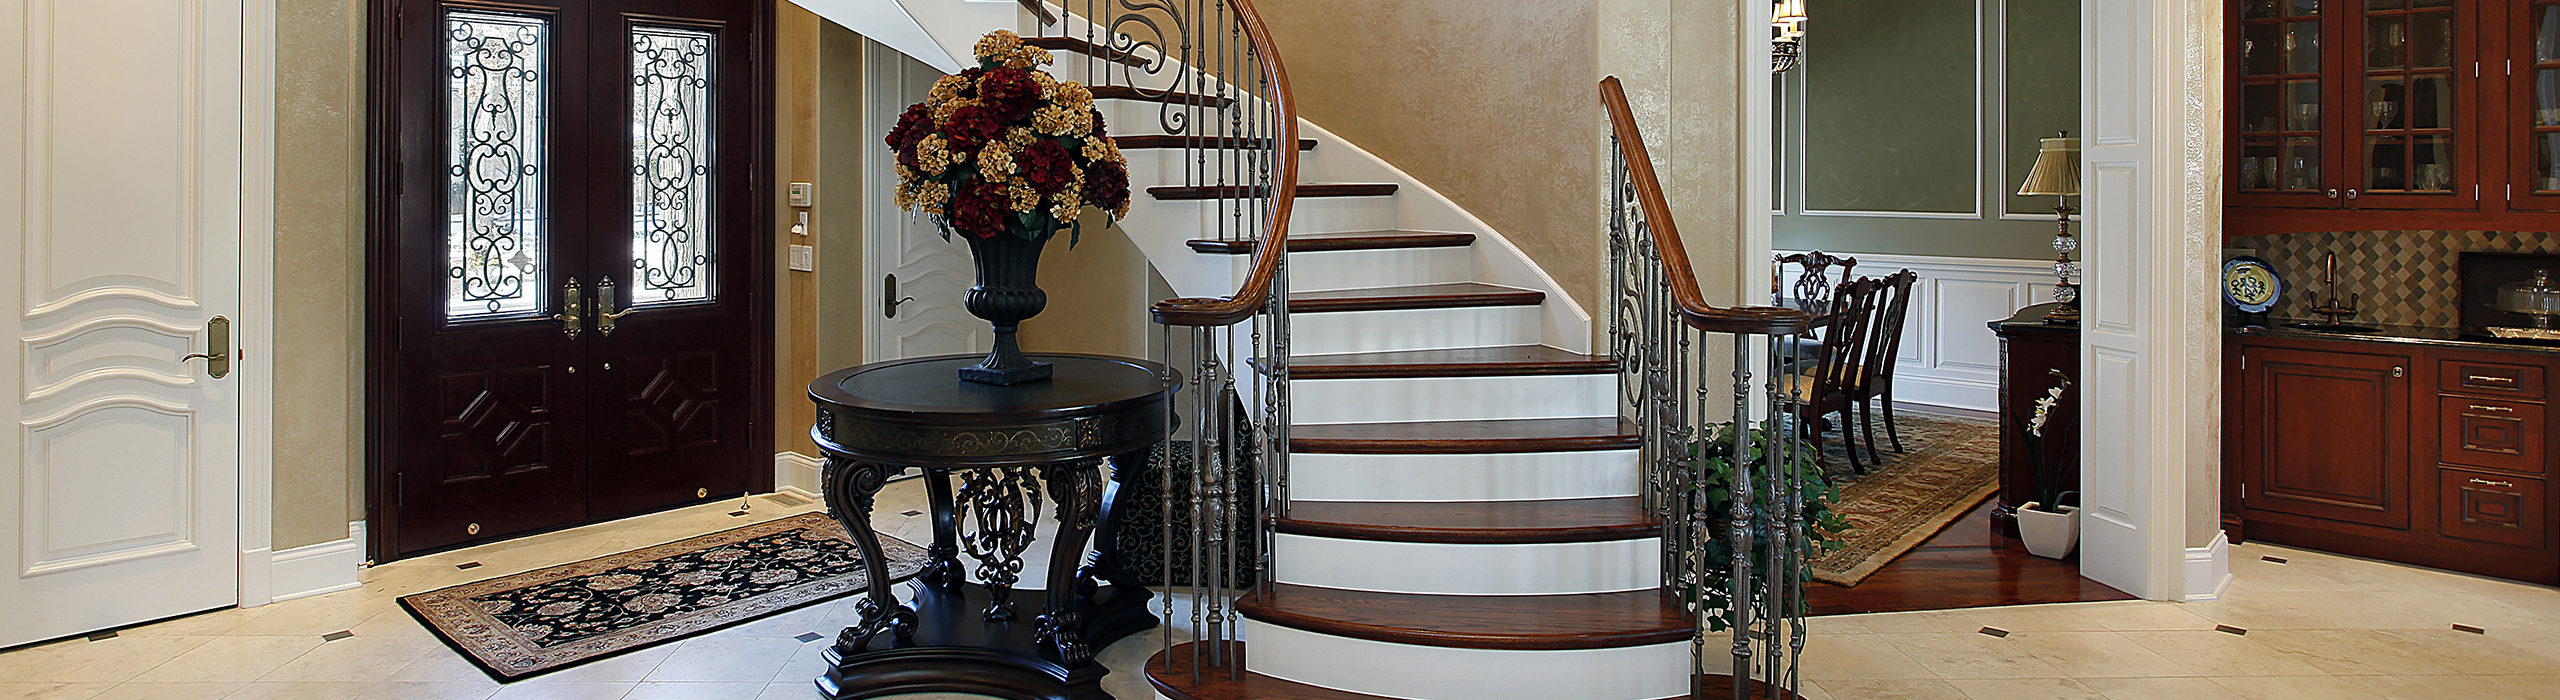 Decorative photo of a fancy balustrade in a grand opening in what looks like a luxury home. Pricing a home correctly is the best way to get the most money from your house sale.